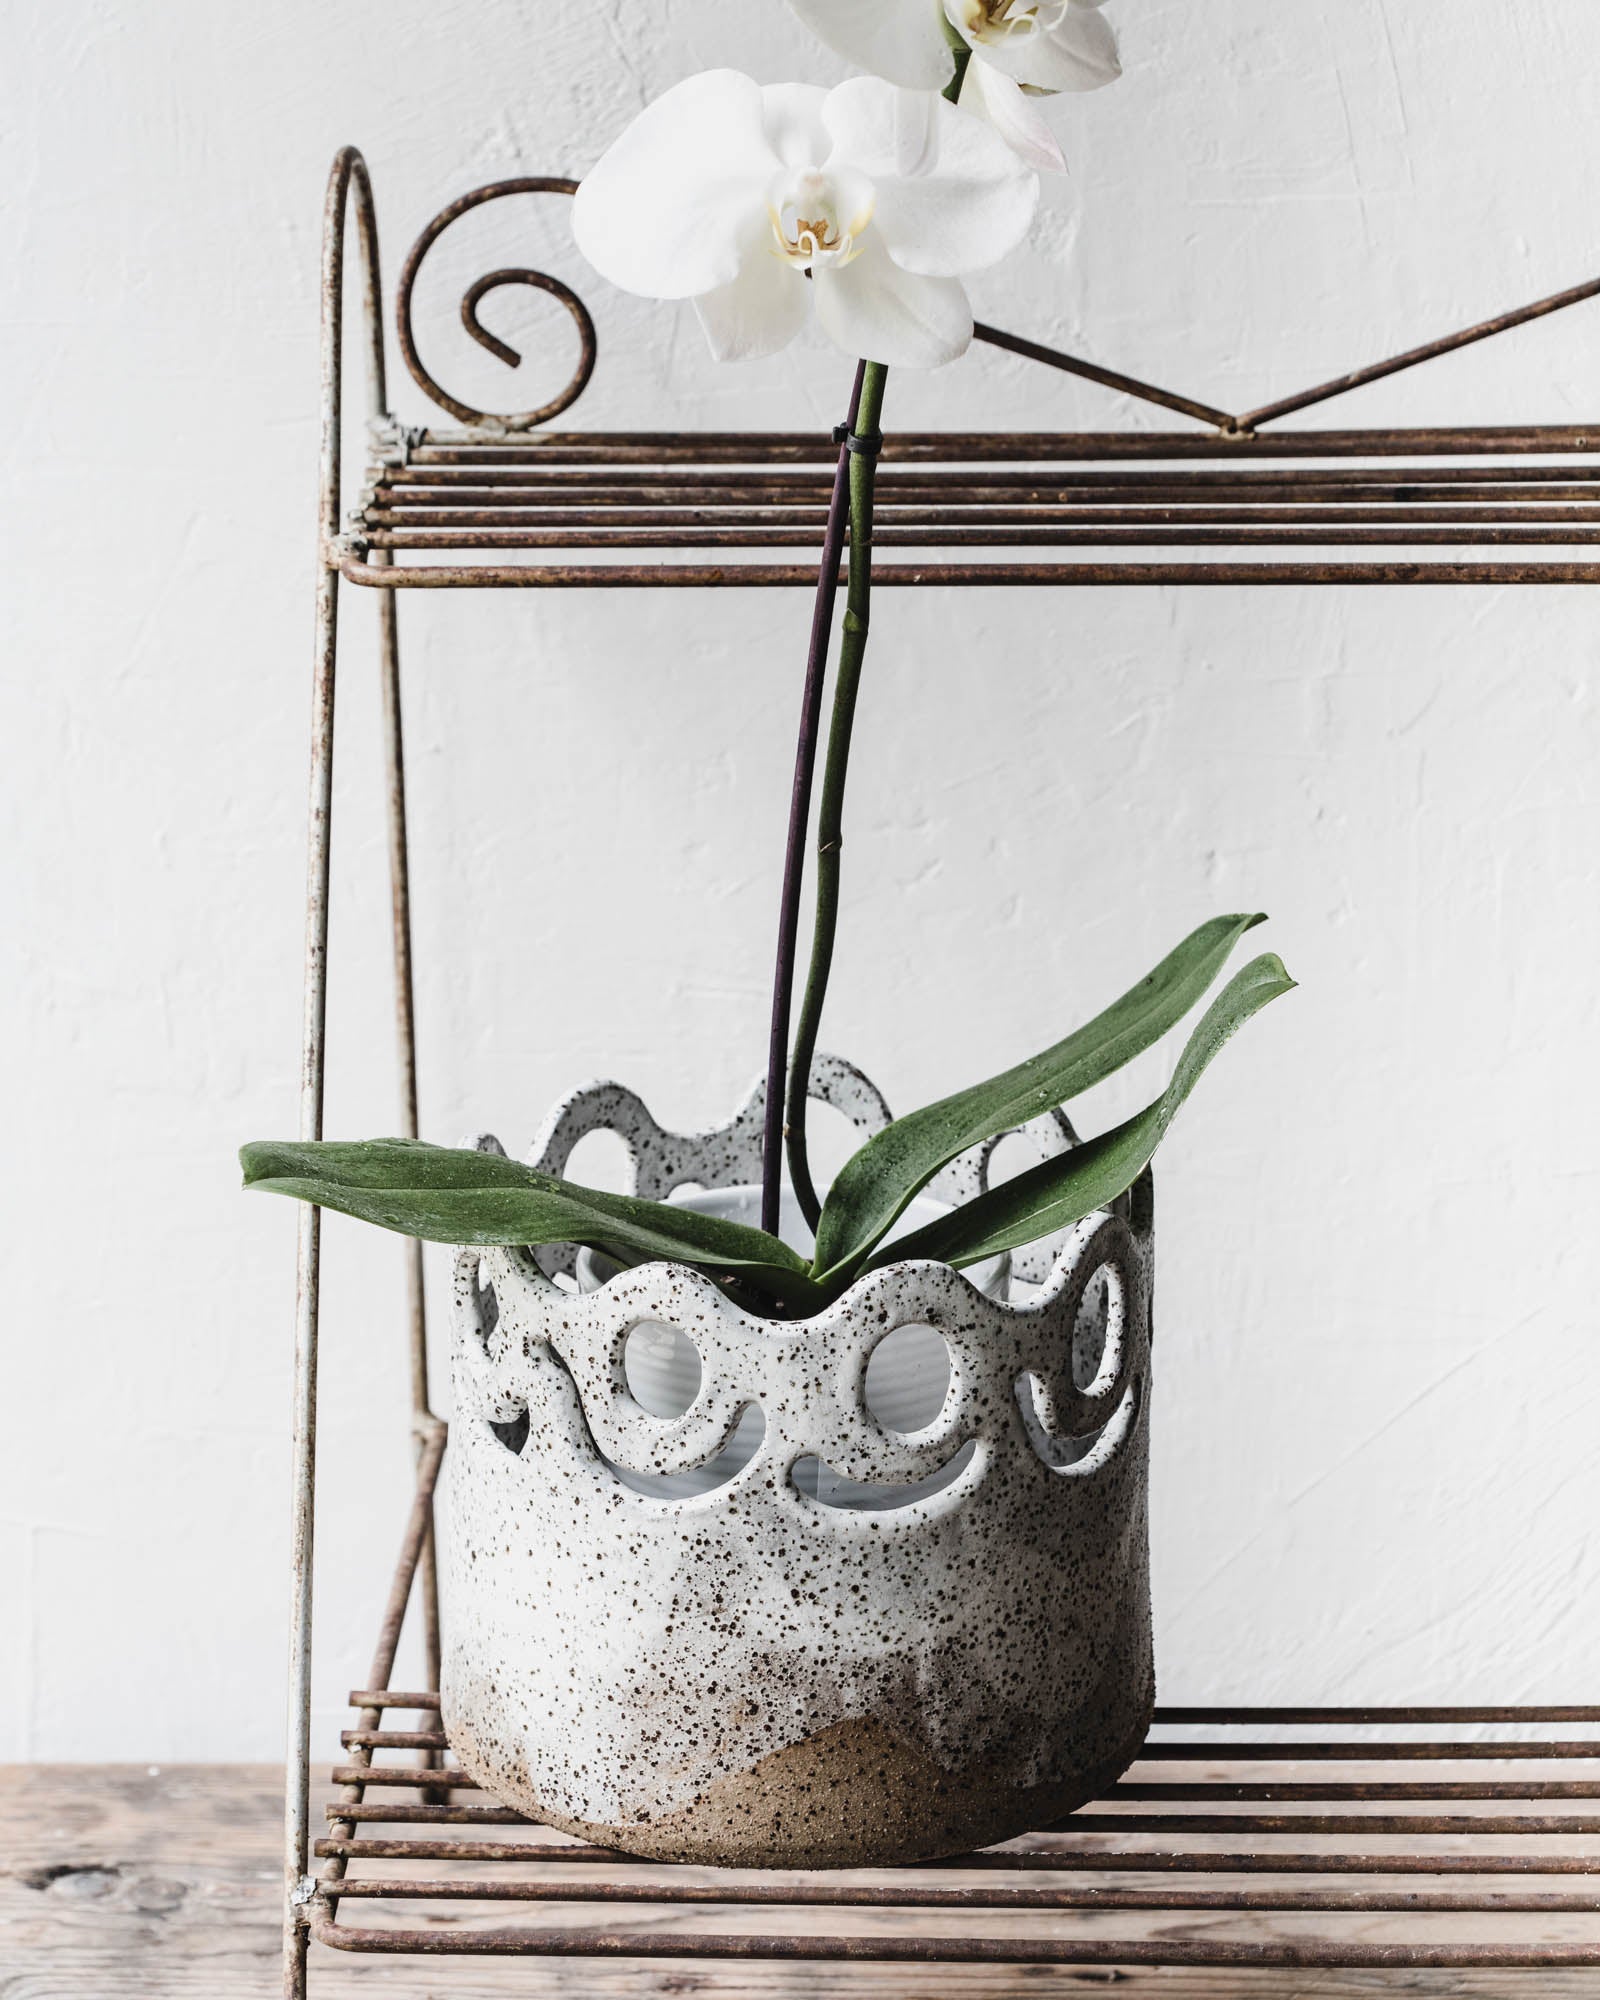 Extra large rustic gritty planter pot with cutout design handmade by clay beehive ceramics